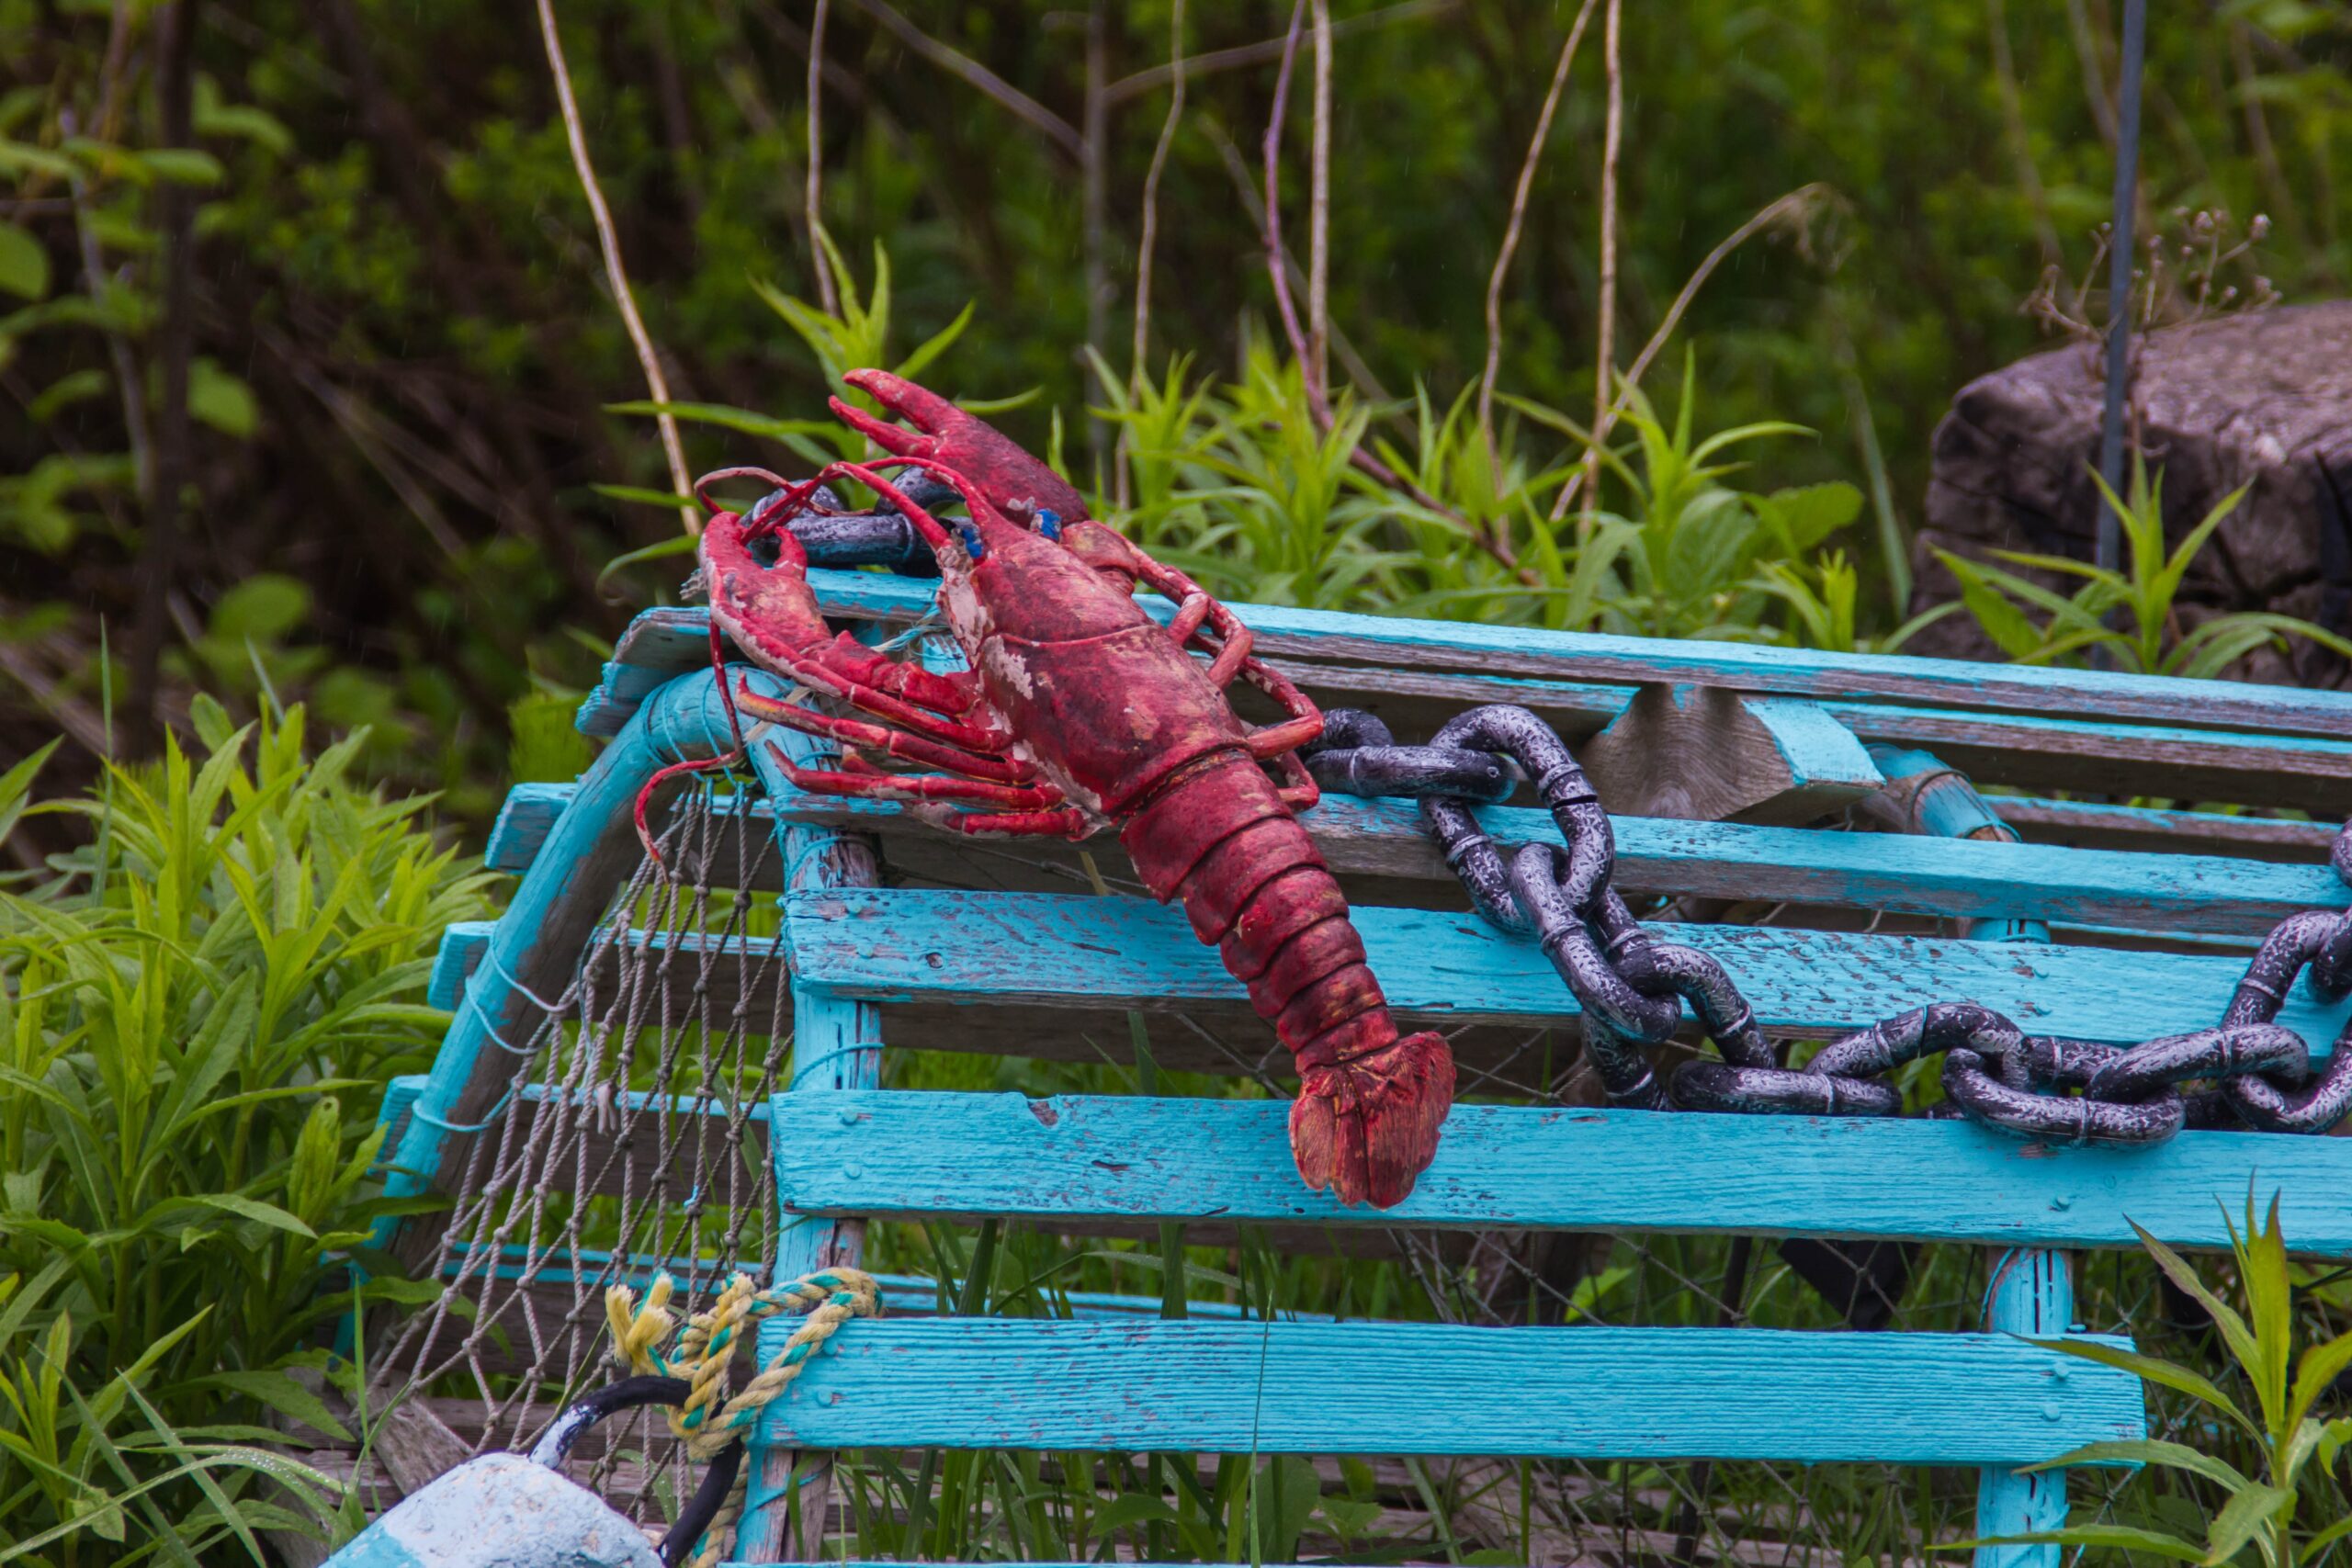 A vibrant lobster in Nova Scotia, symbolizing the rich seafood culture of the region and highlighting the connection to CBD Oil Canada